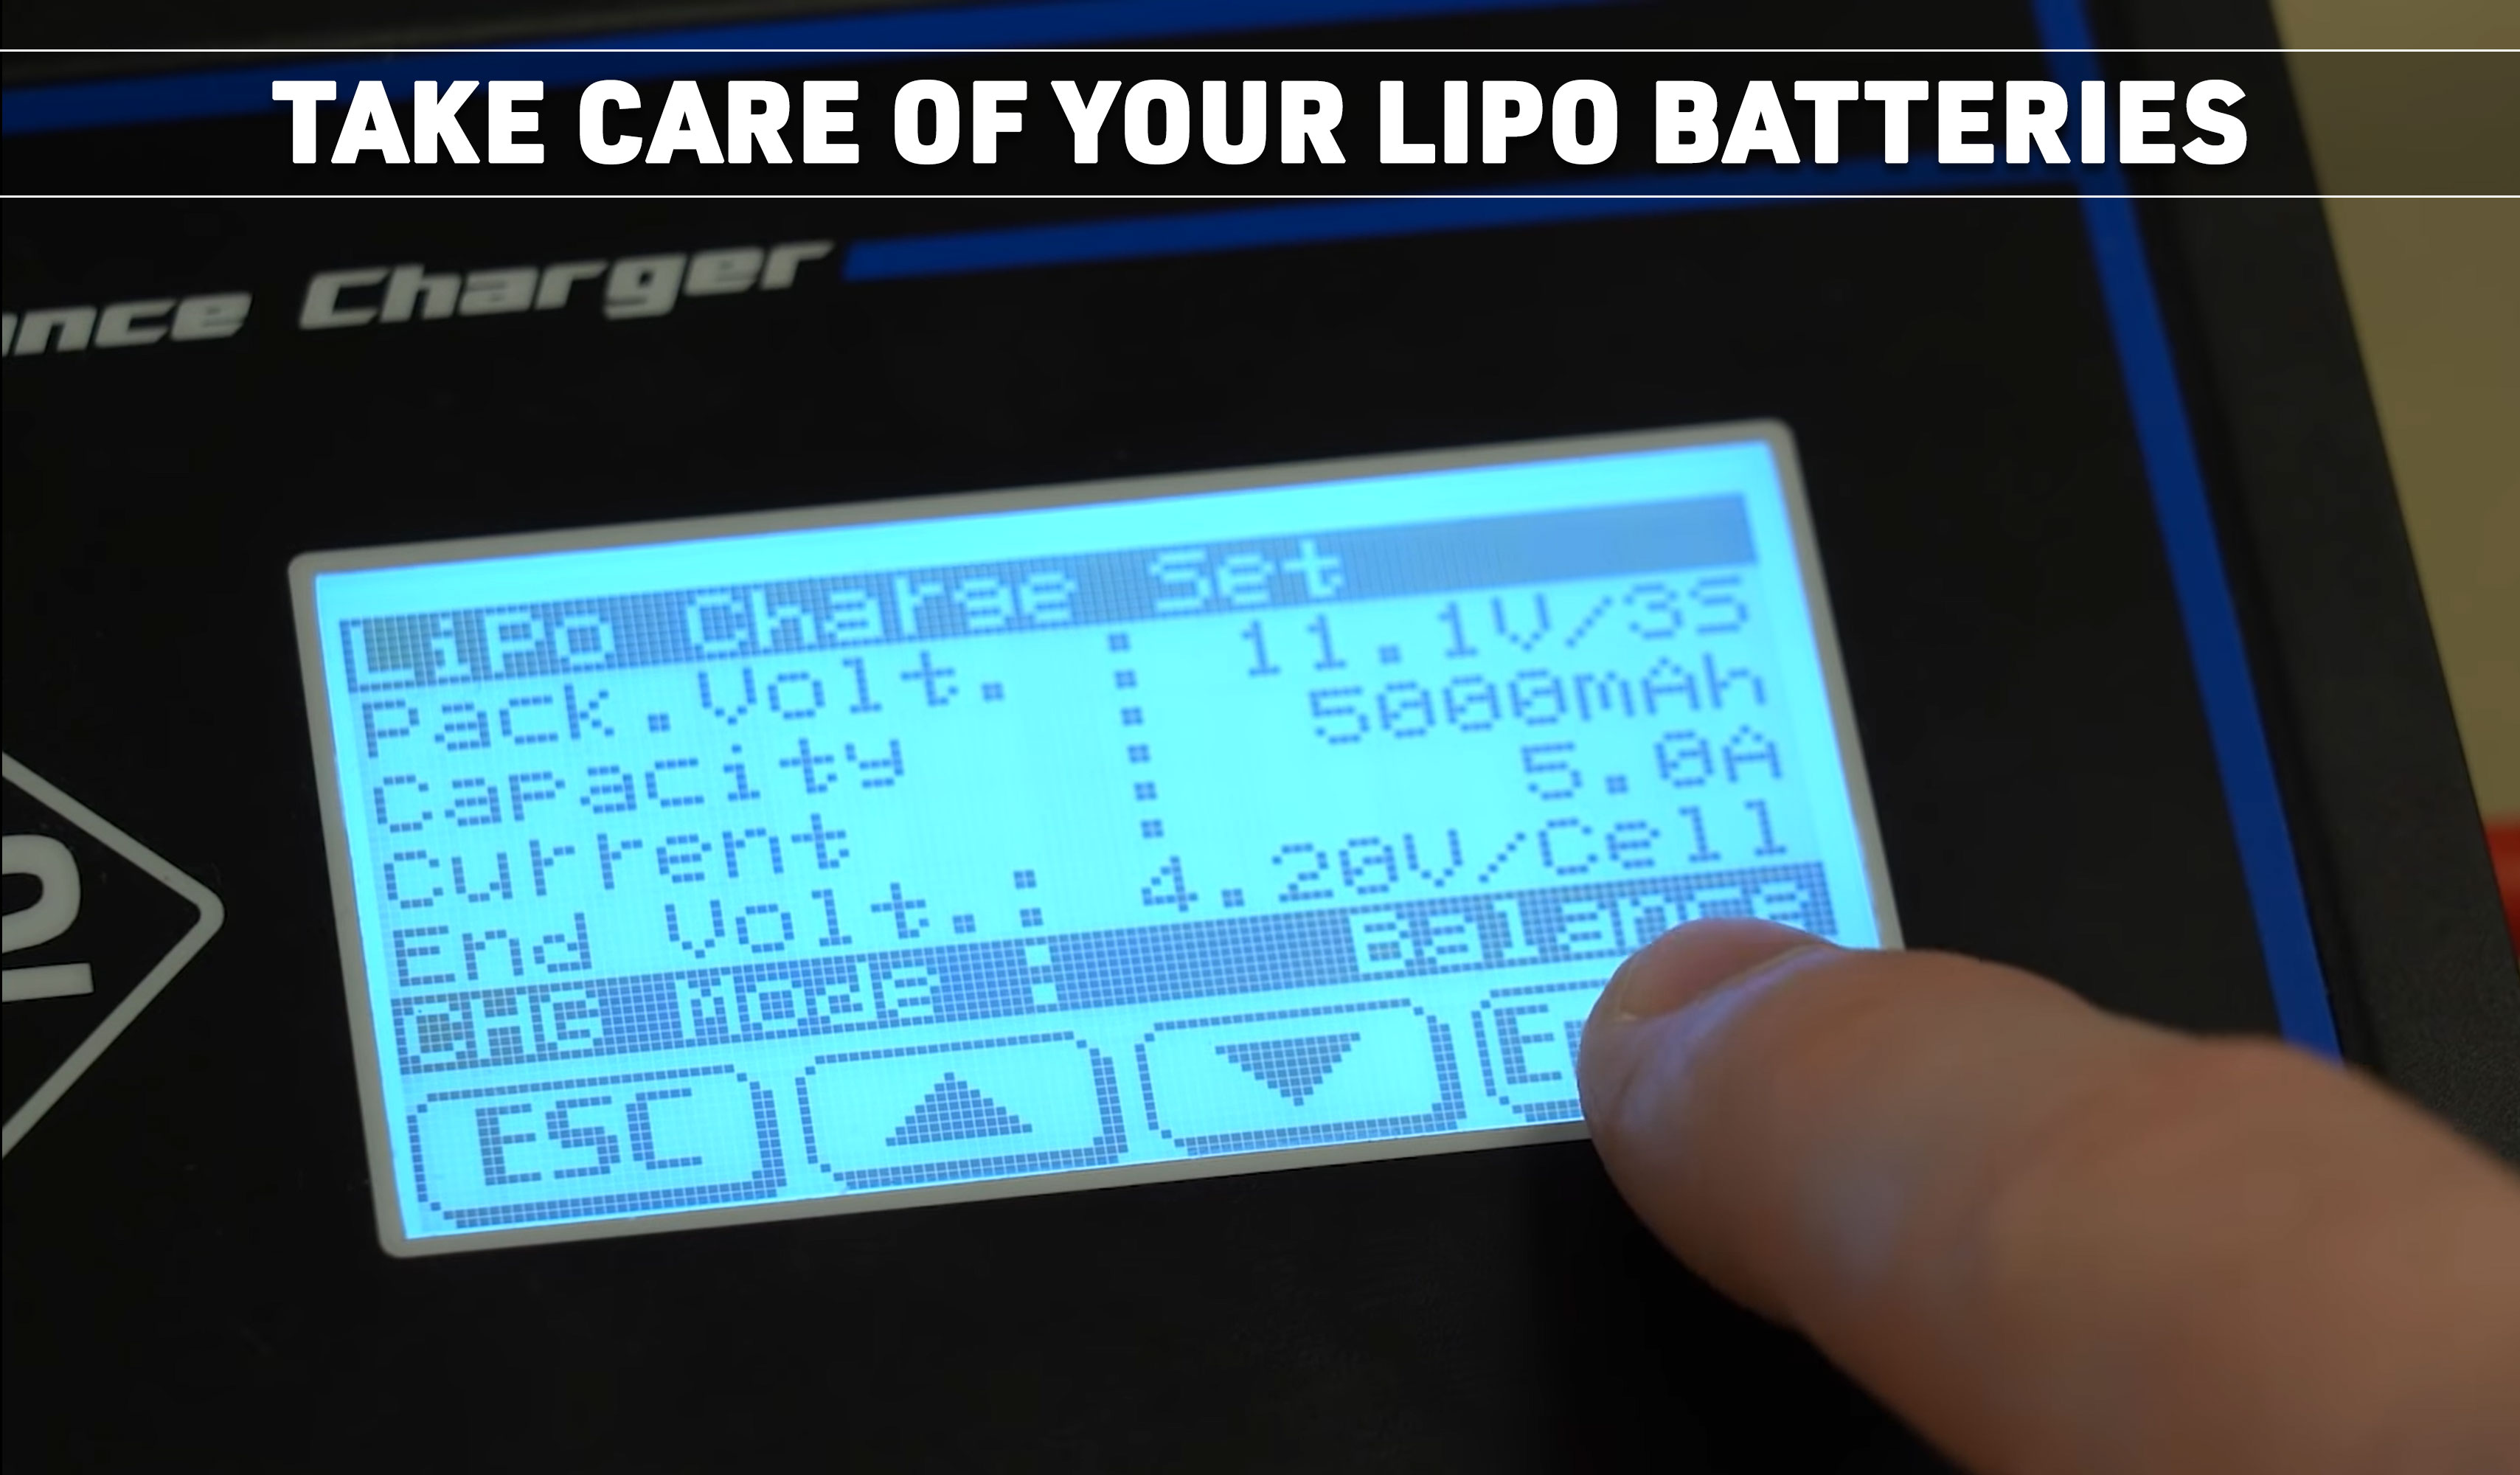 Take Care of Your LiPo Batteries